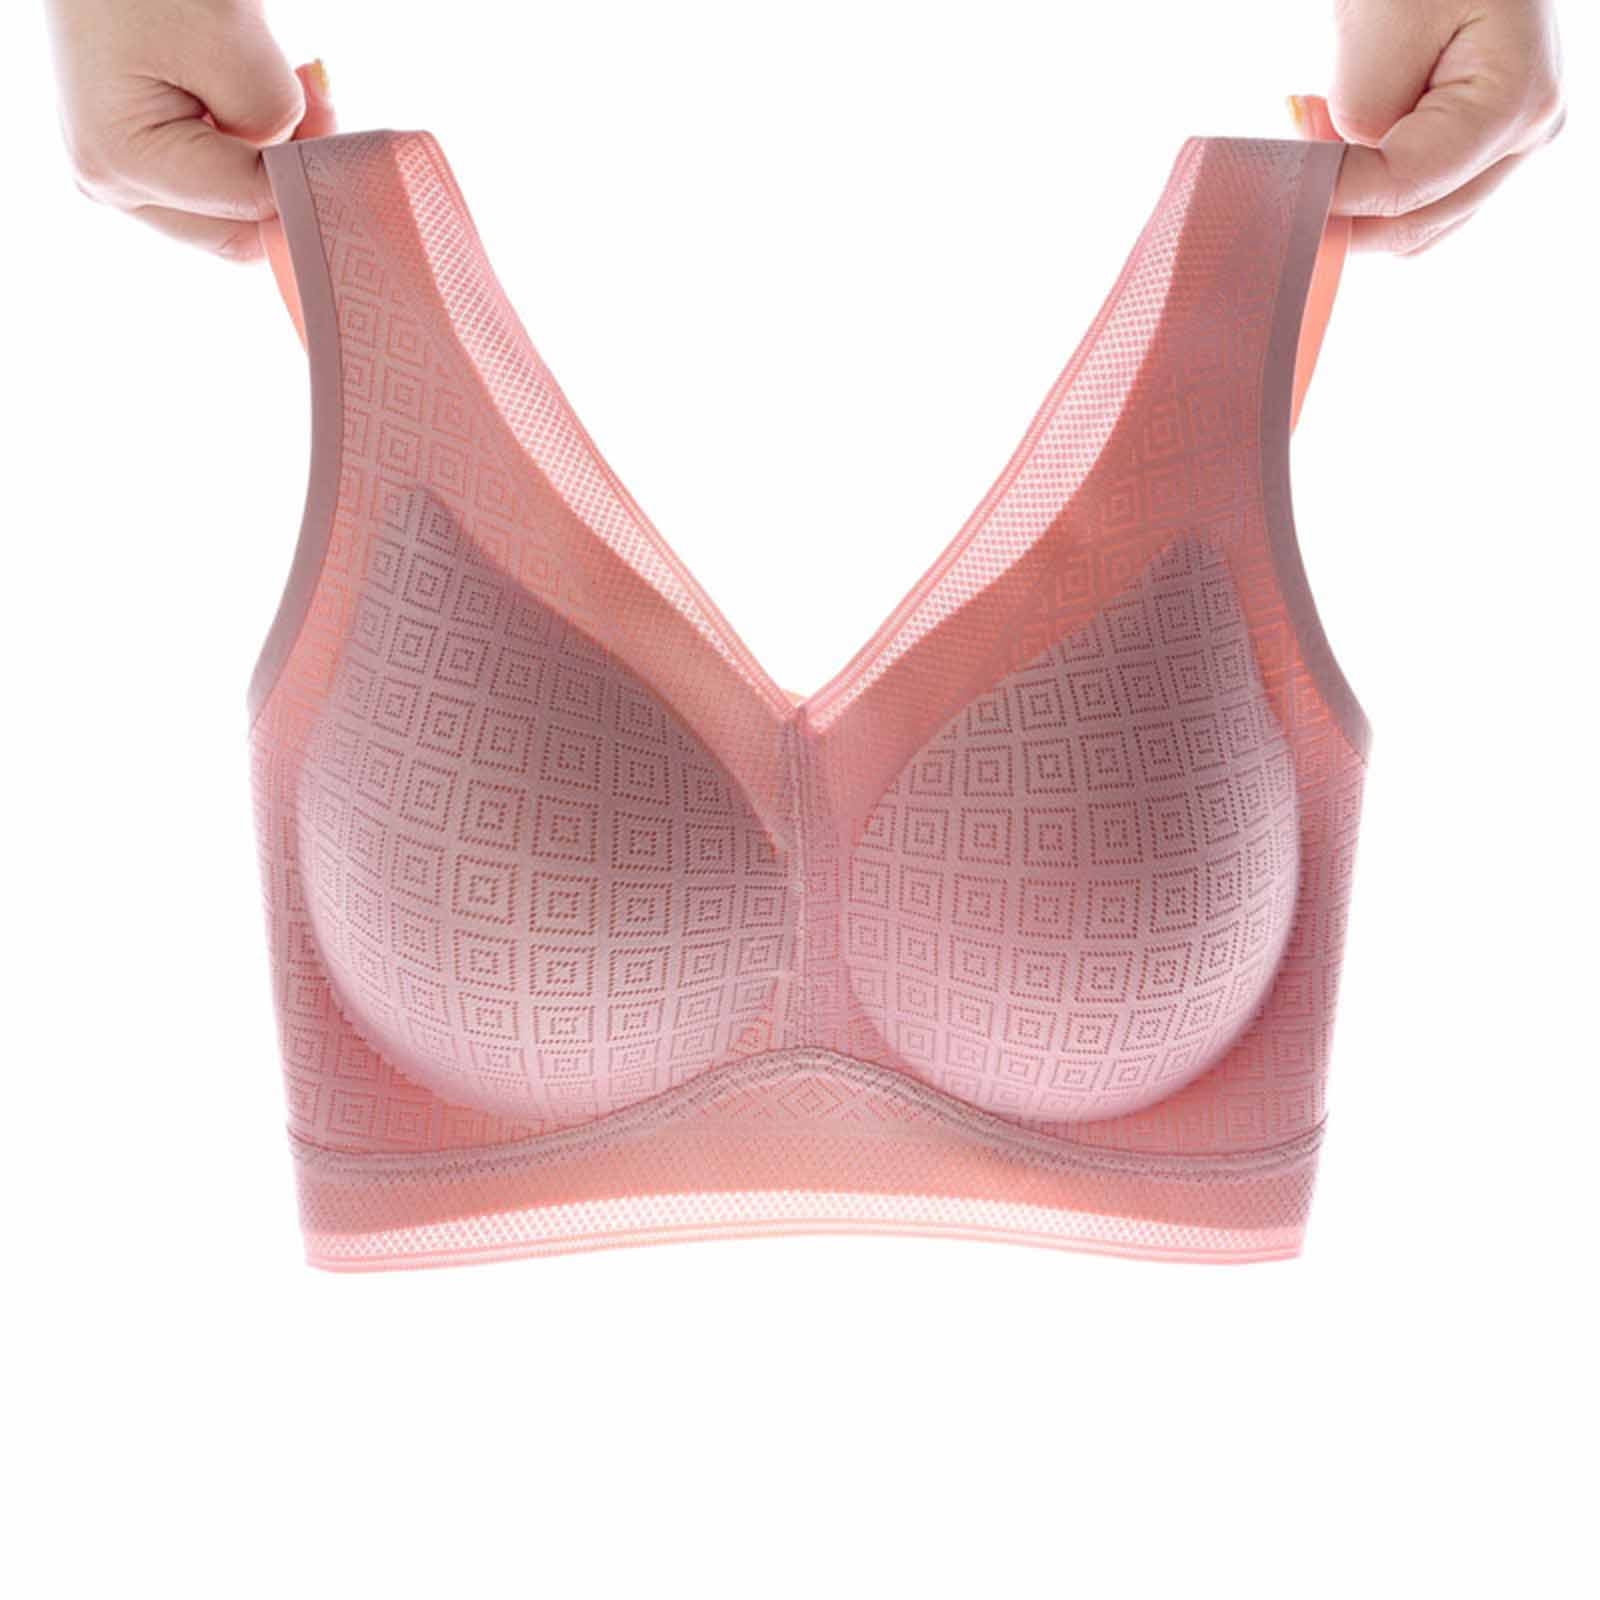 Raeneomay Bras for Women Deals Clearance Seamless Latex Sports Bra